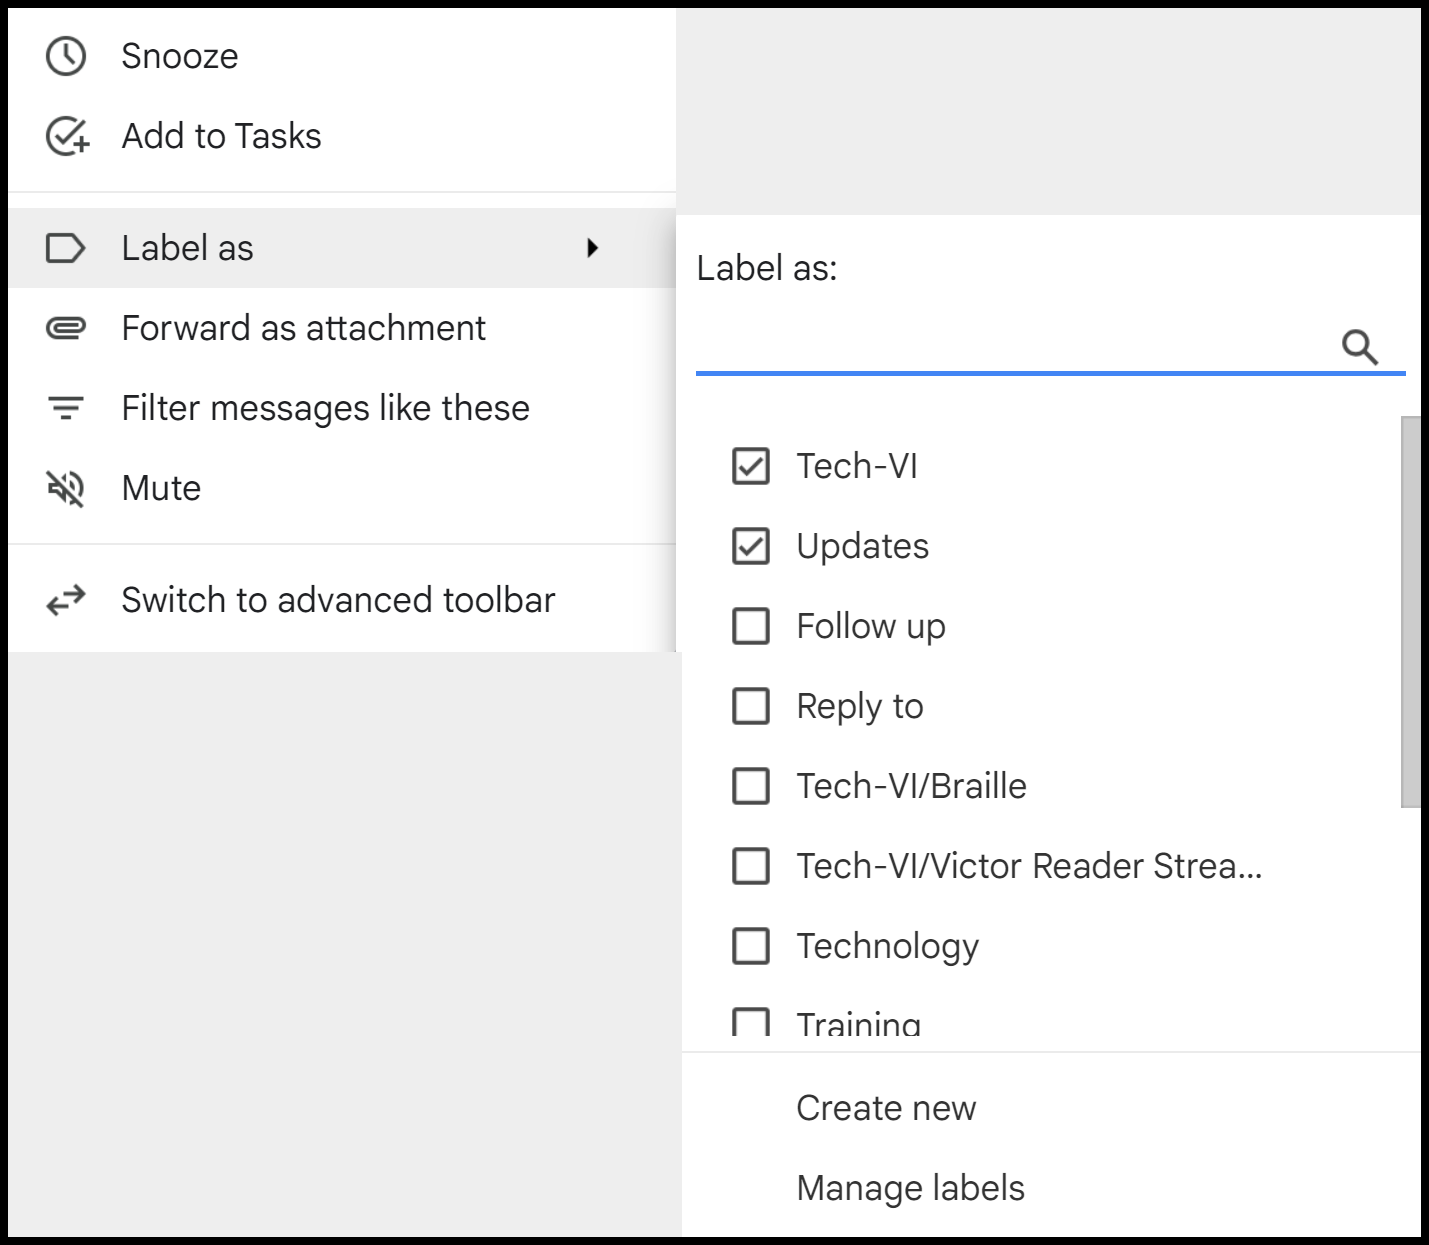 The 'Label as' menu showing labels associated with the currently selected message in a list view. If the message has a label associated with it, the check box next to it in the menu is 'checked.'